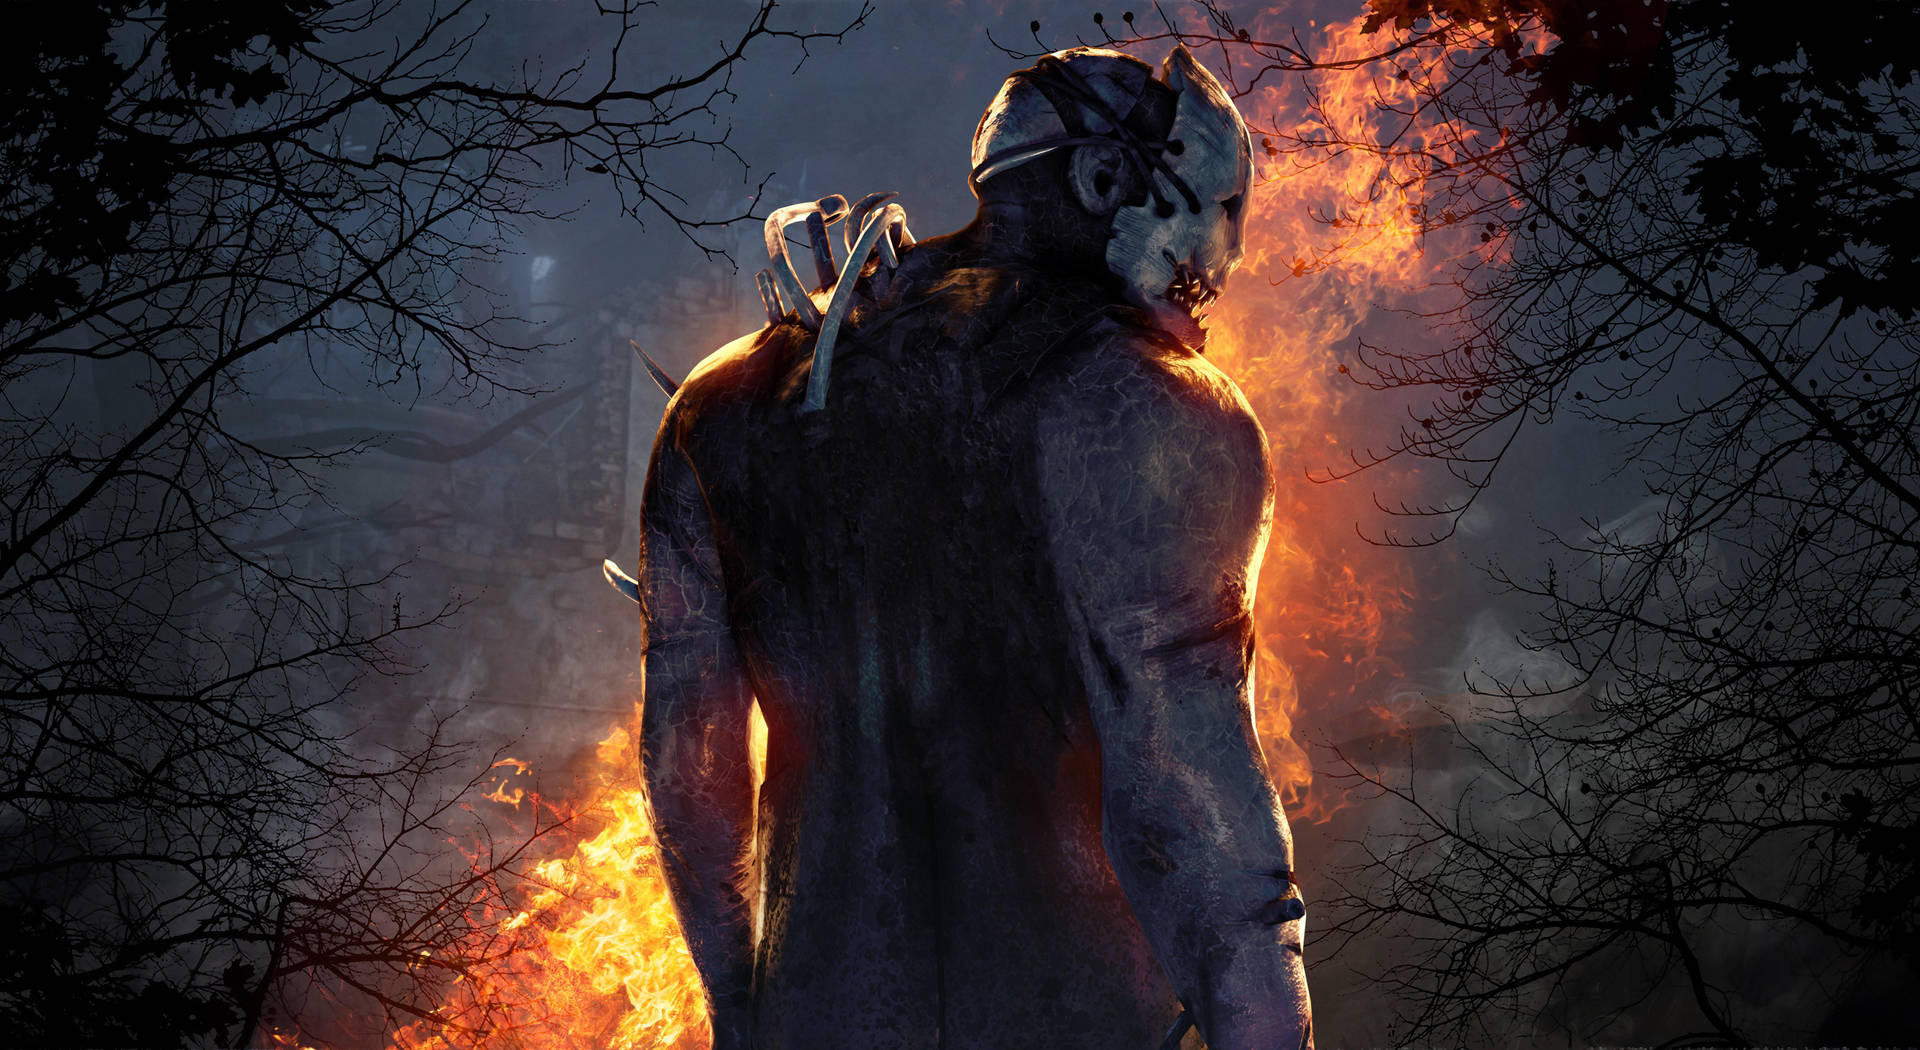 The Trapper from Dead By Daylight sets the stage on fire Wallpaper